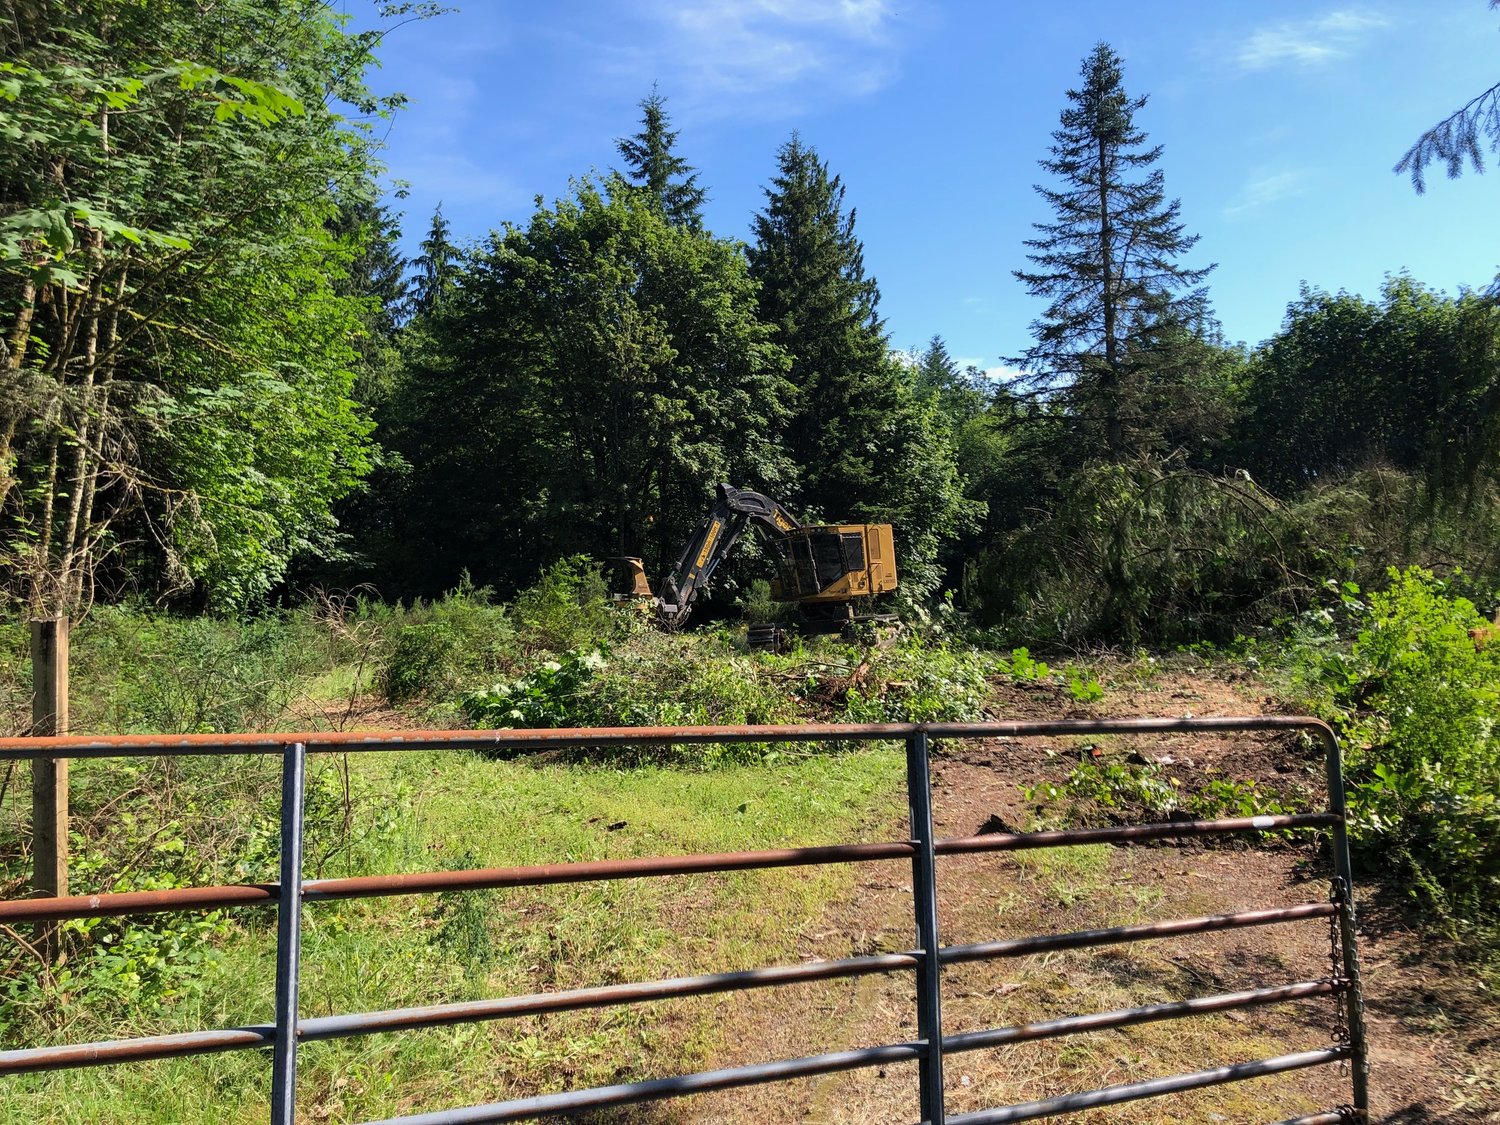 Logging operations at Cooper Crest Forest started at 8 a.m. on June 27, 2022.